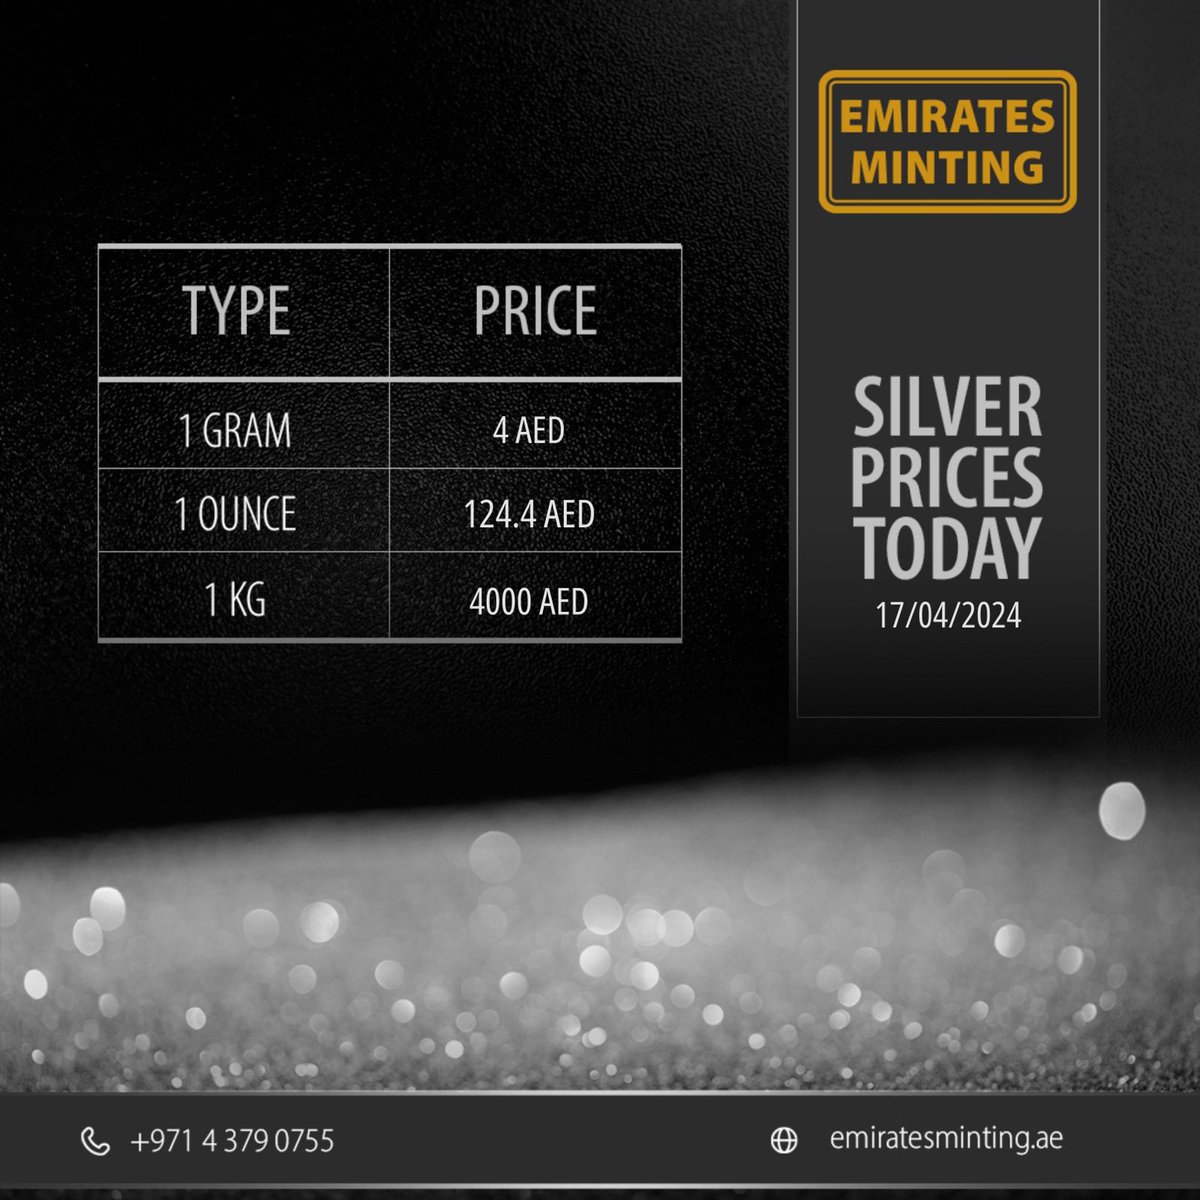 In a daily financials, Gold and Silver prices reveal ongoing fluctuations. 
(Gold & Silver Prices)
.
.
 #emiratesminting #Goldinvesting #Gold #Silver #Bullion #GoldBars #SilverBars #InvestmentPortfolio #BuyGold #GoldBullion #GoldCoins #SilverCoins #PureElegance ##Gold_Coins